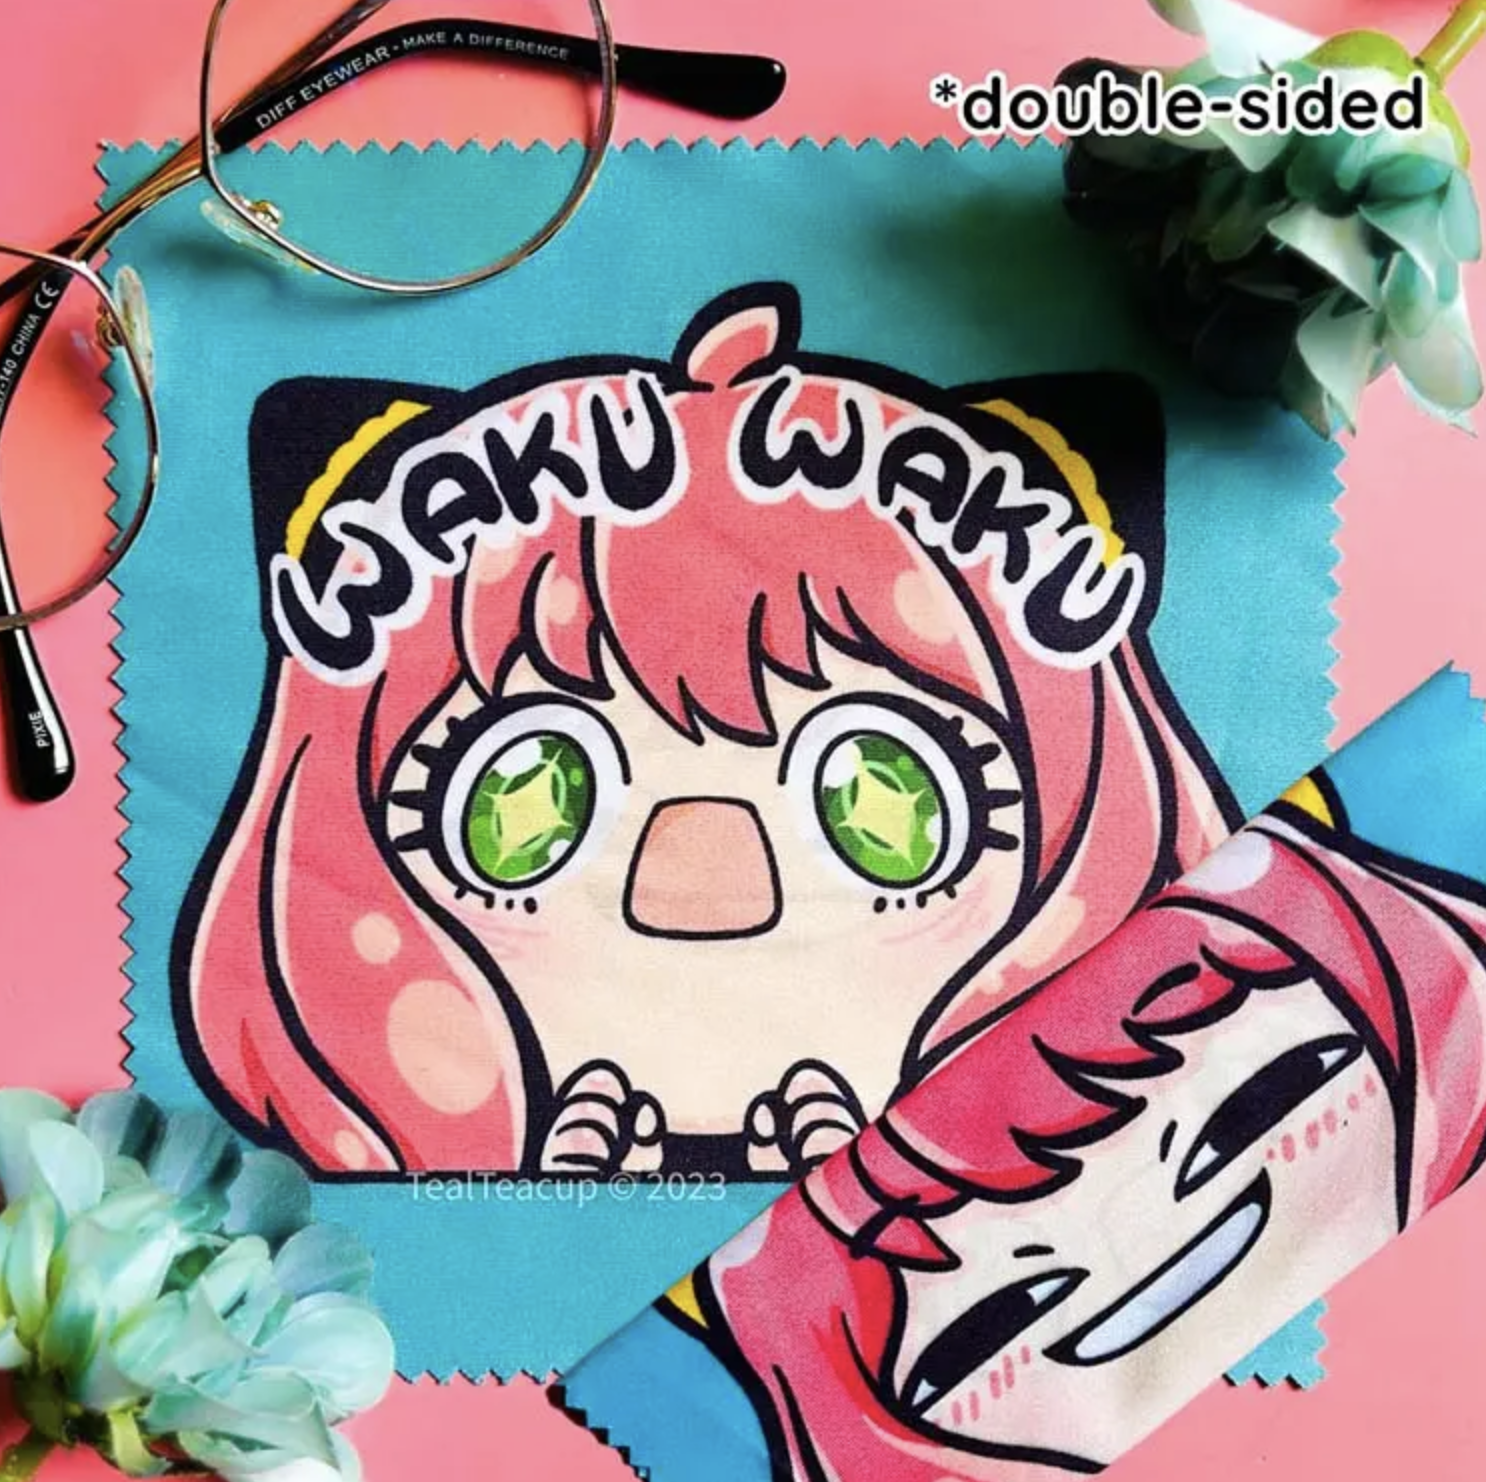 Double-sided anime-style character mouse pad with a &#x27;WAKU WAKU&#x27; design, flowers, and glasses around it